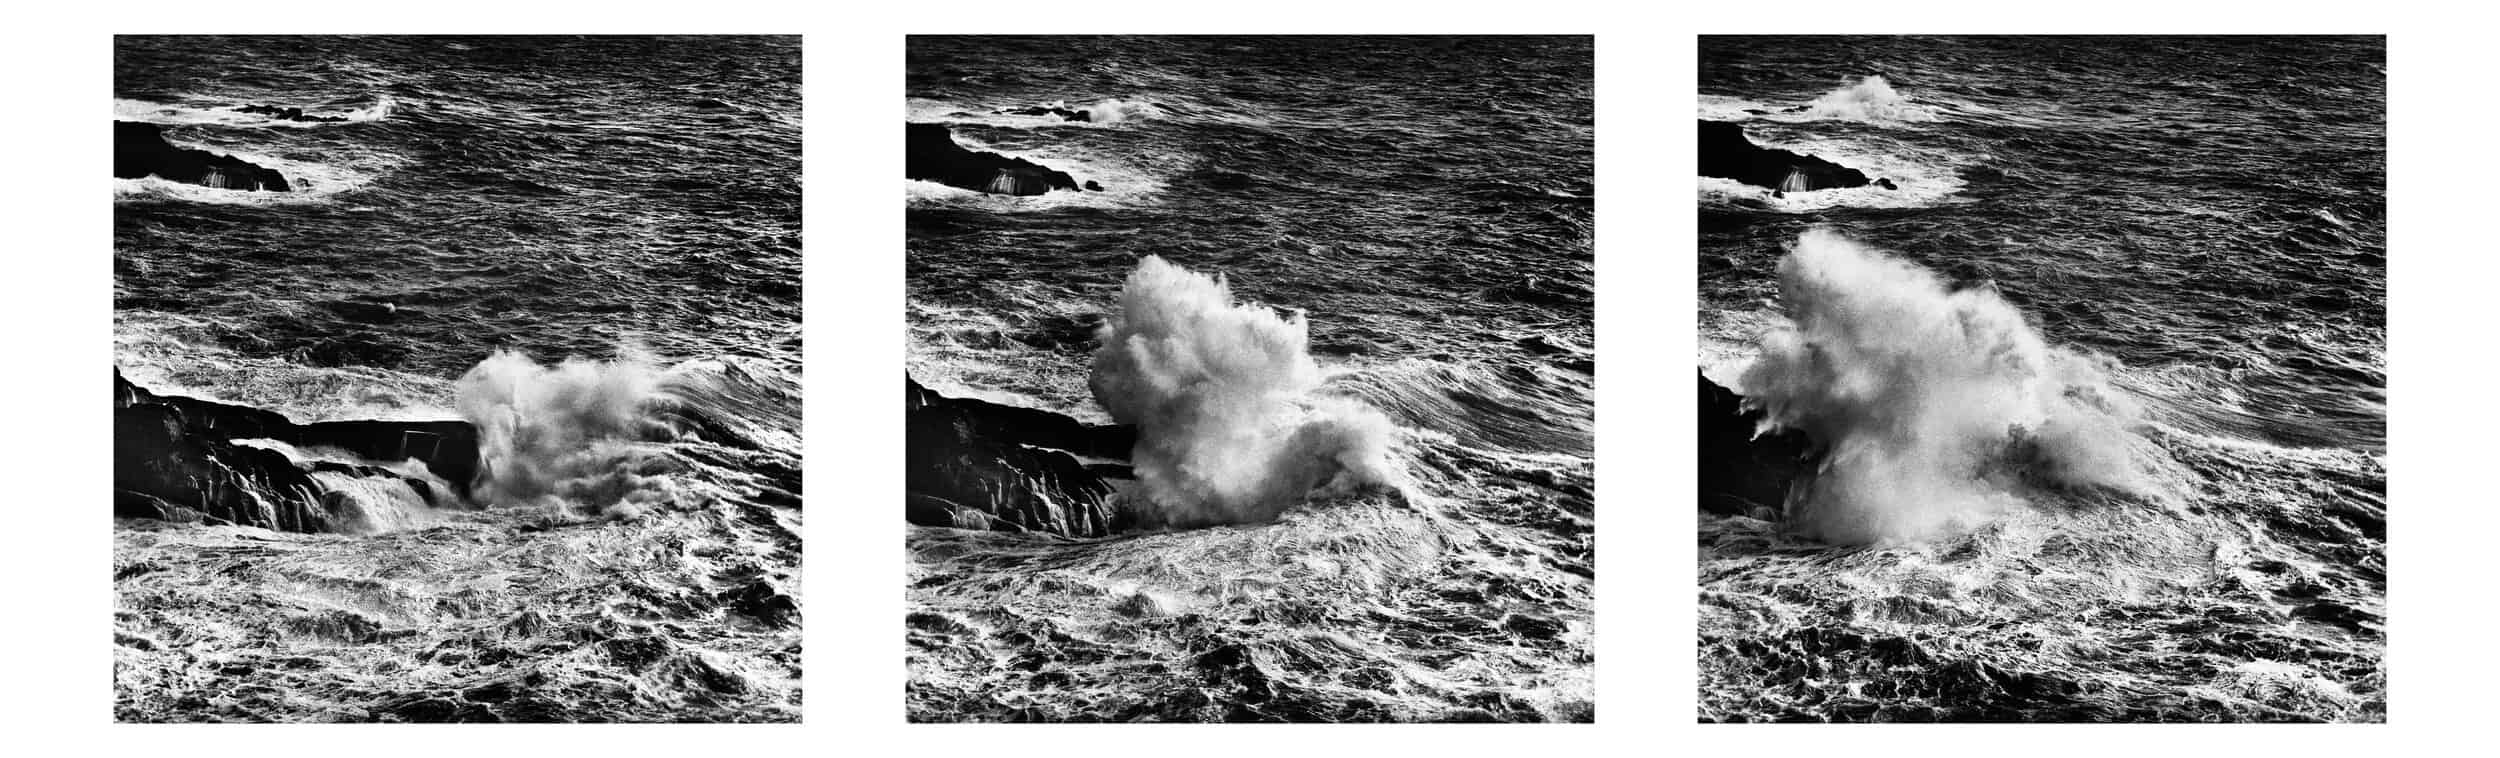 Image ID: A series of three square format black and white images. The images are grainy and have been made on film. This sequence shows the stages of a powerful wave approaching and breaking on coastal rocks. The images are very dark, but there is also bright white in the frothing ocean.